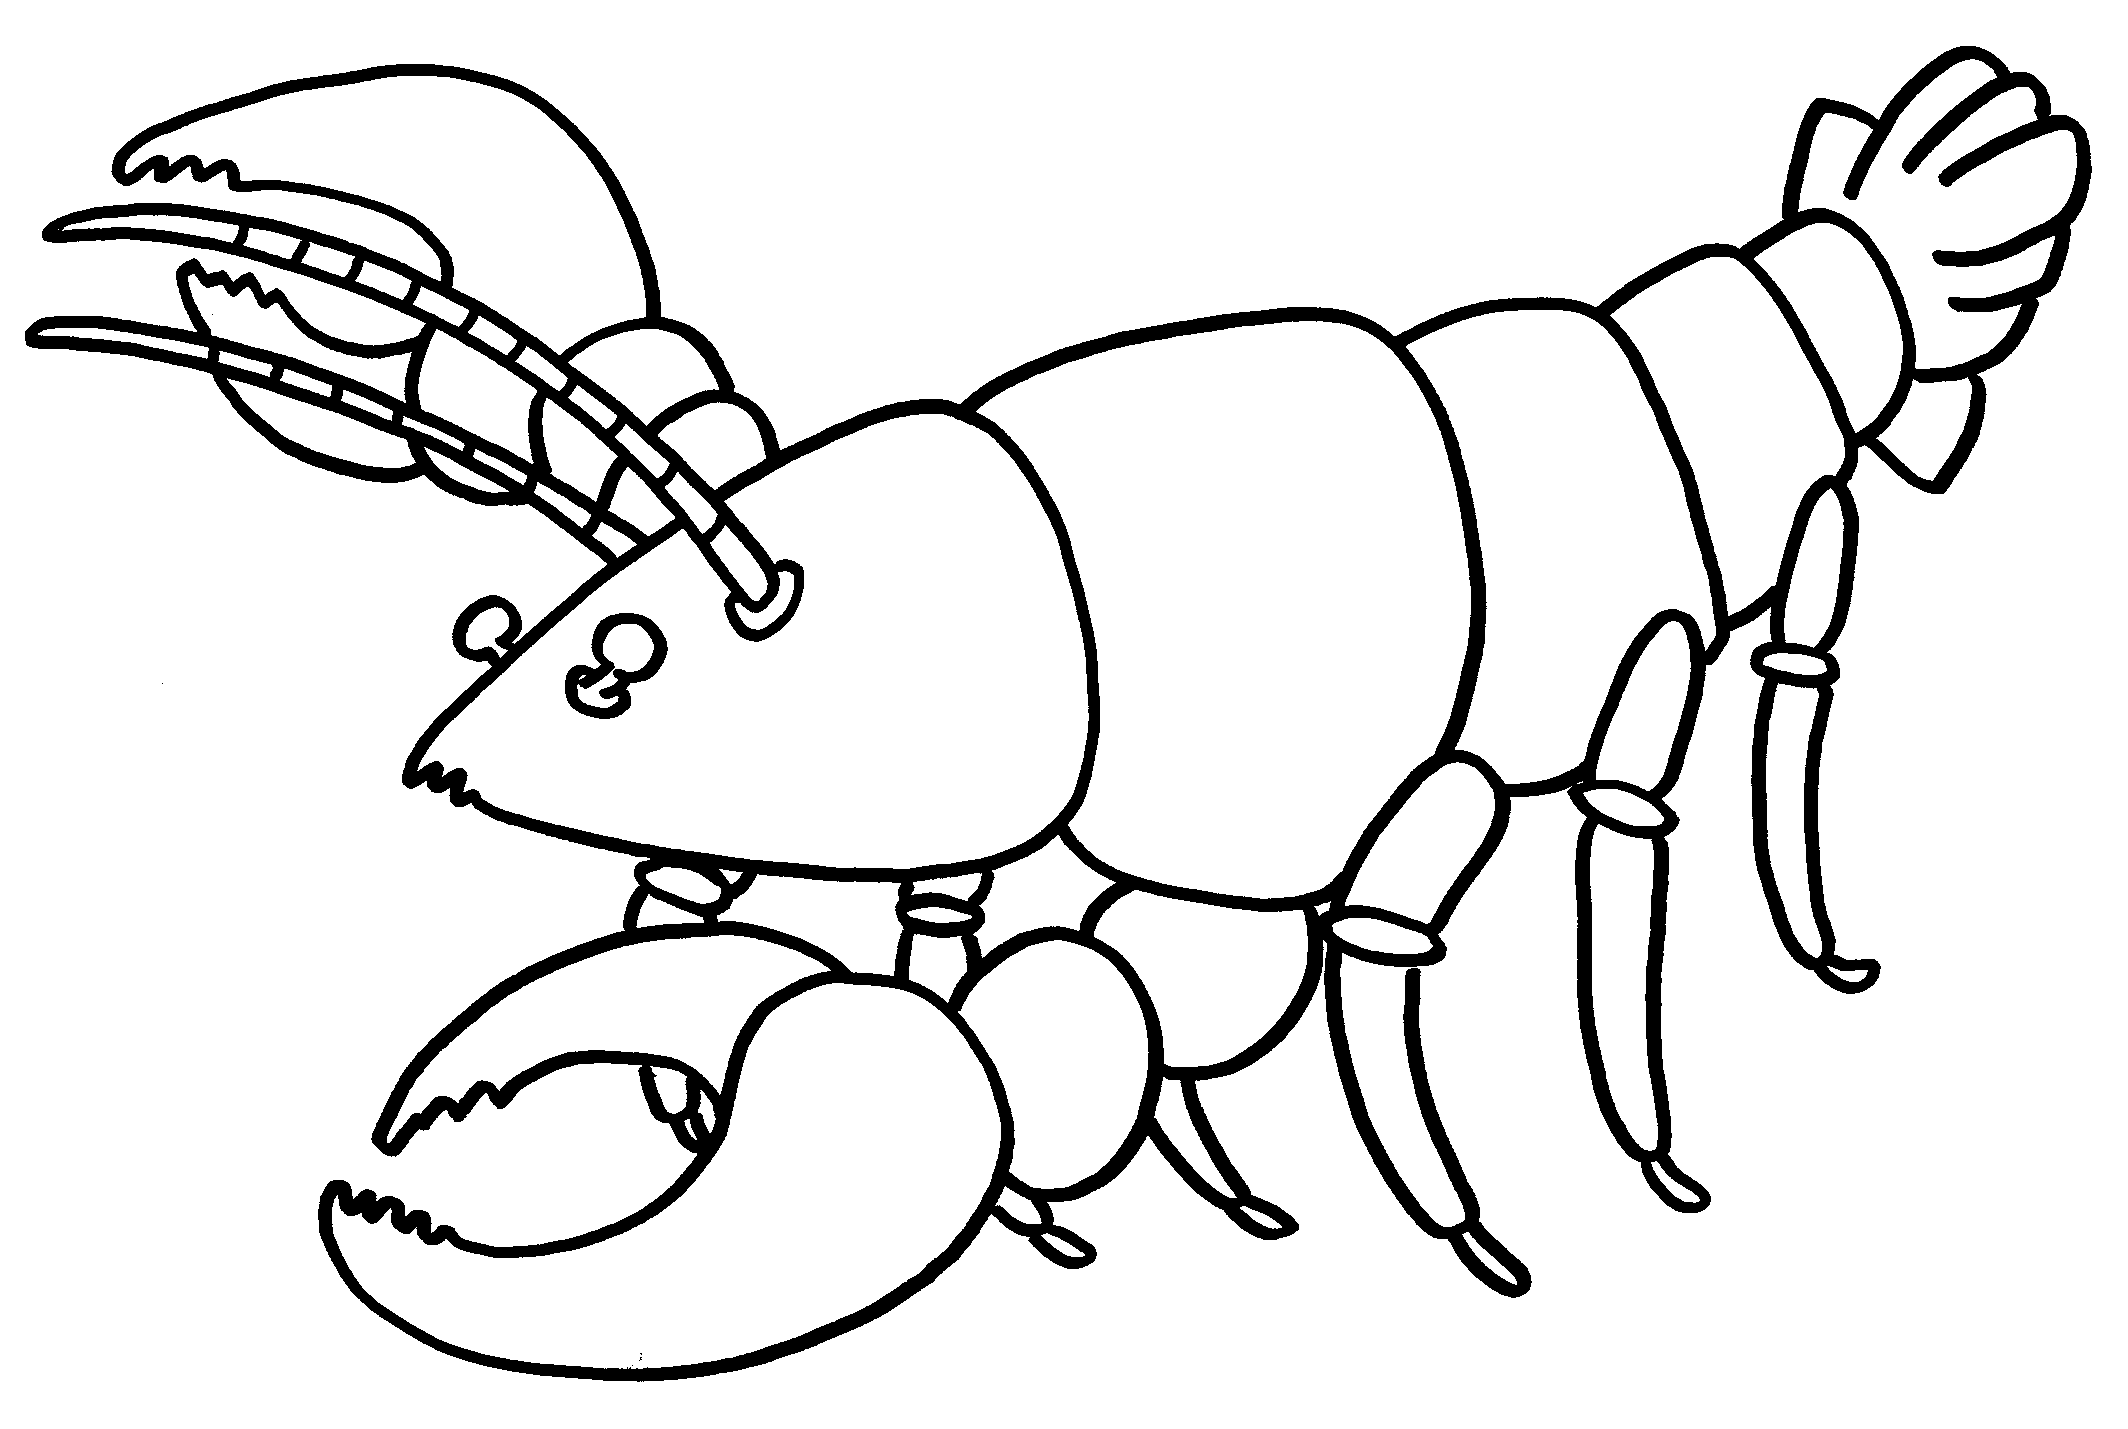 Crab Clipart Black And White | Clipart Panda - Free Clipart Images